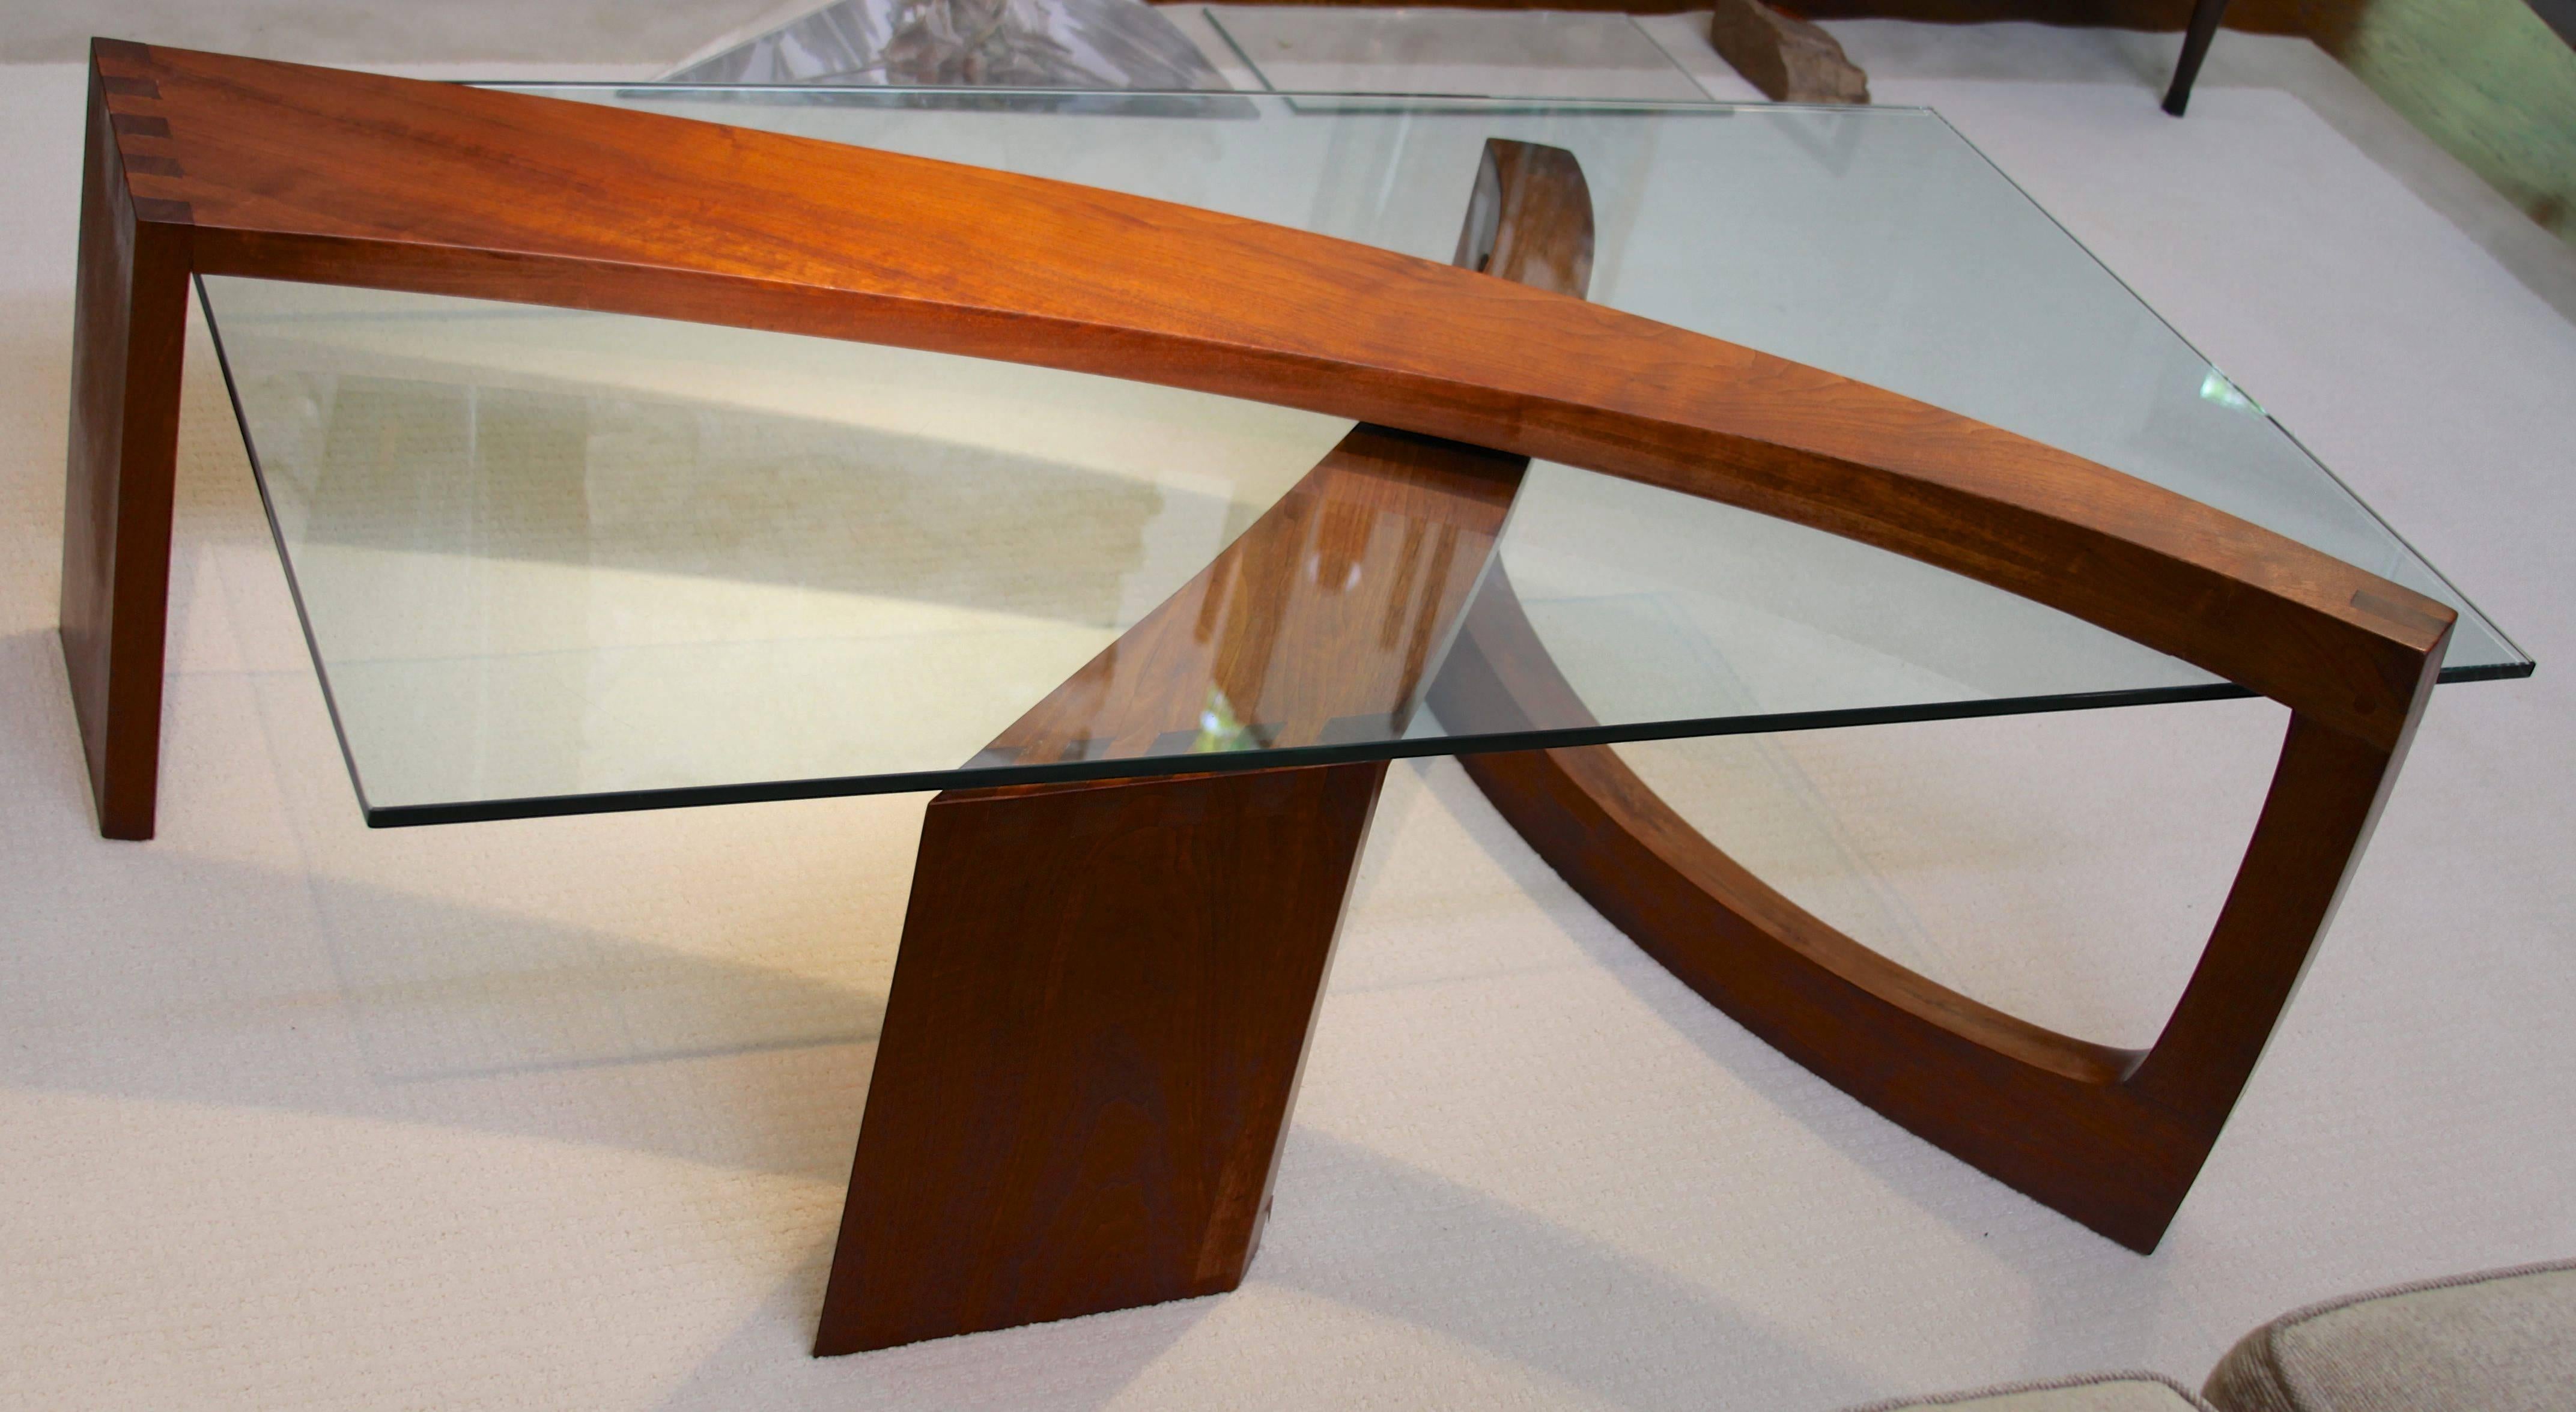 Walnut dovetailed structure supporting a rectangular glass plate.